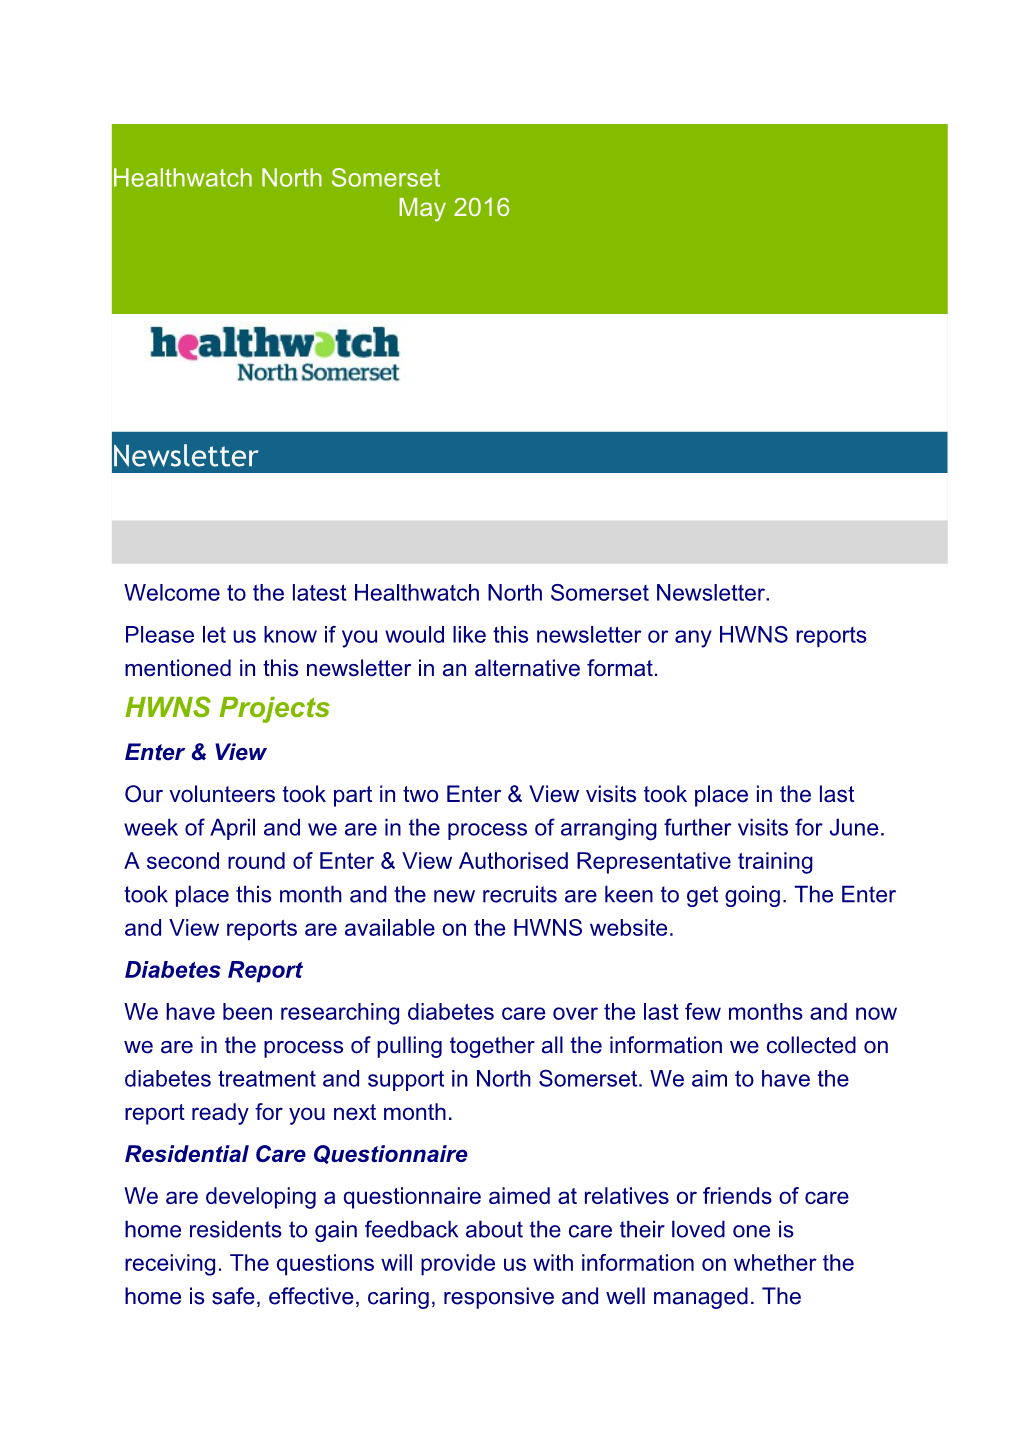 Welcome to the Latesthealthwatch North Somersetnewsletter